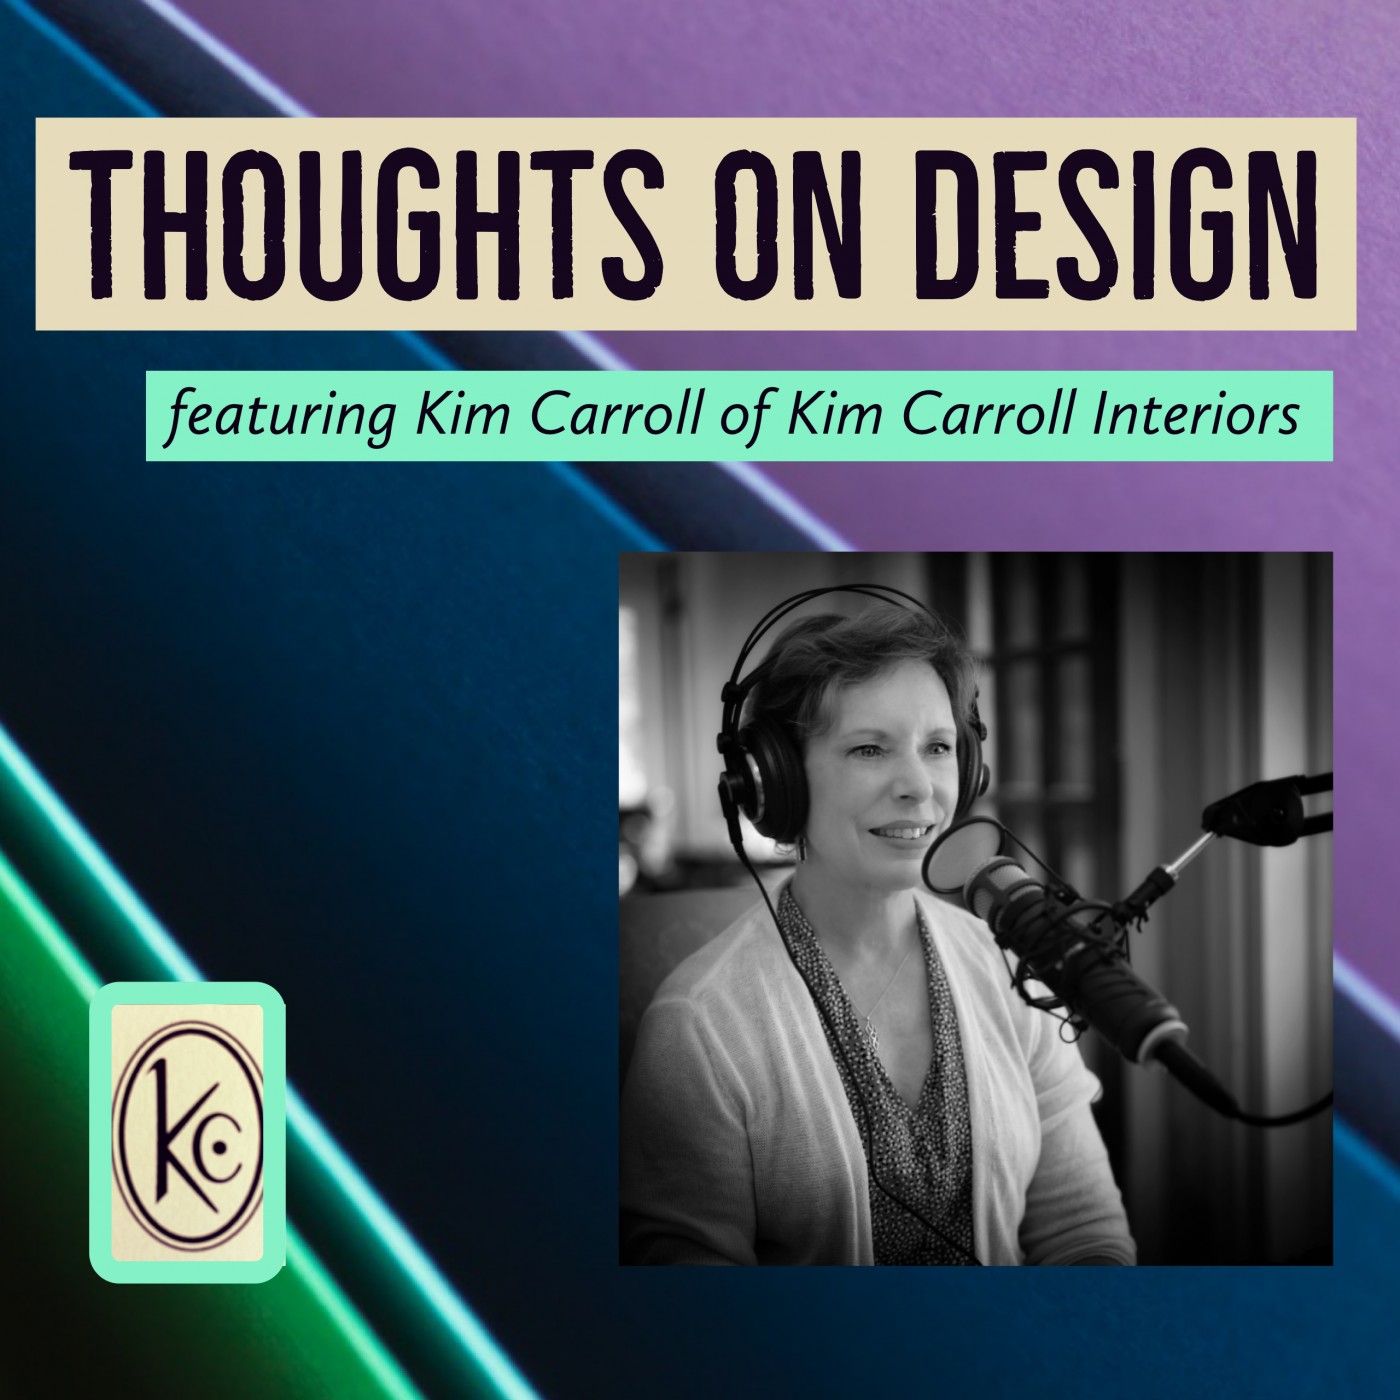 Thoughts on Design – featuring Kim Carroll Interiors